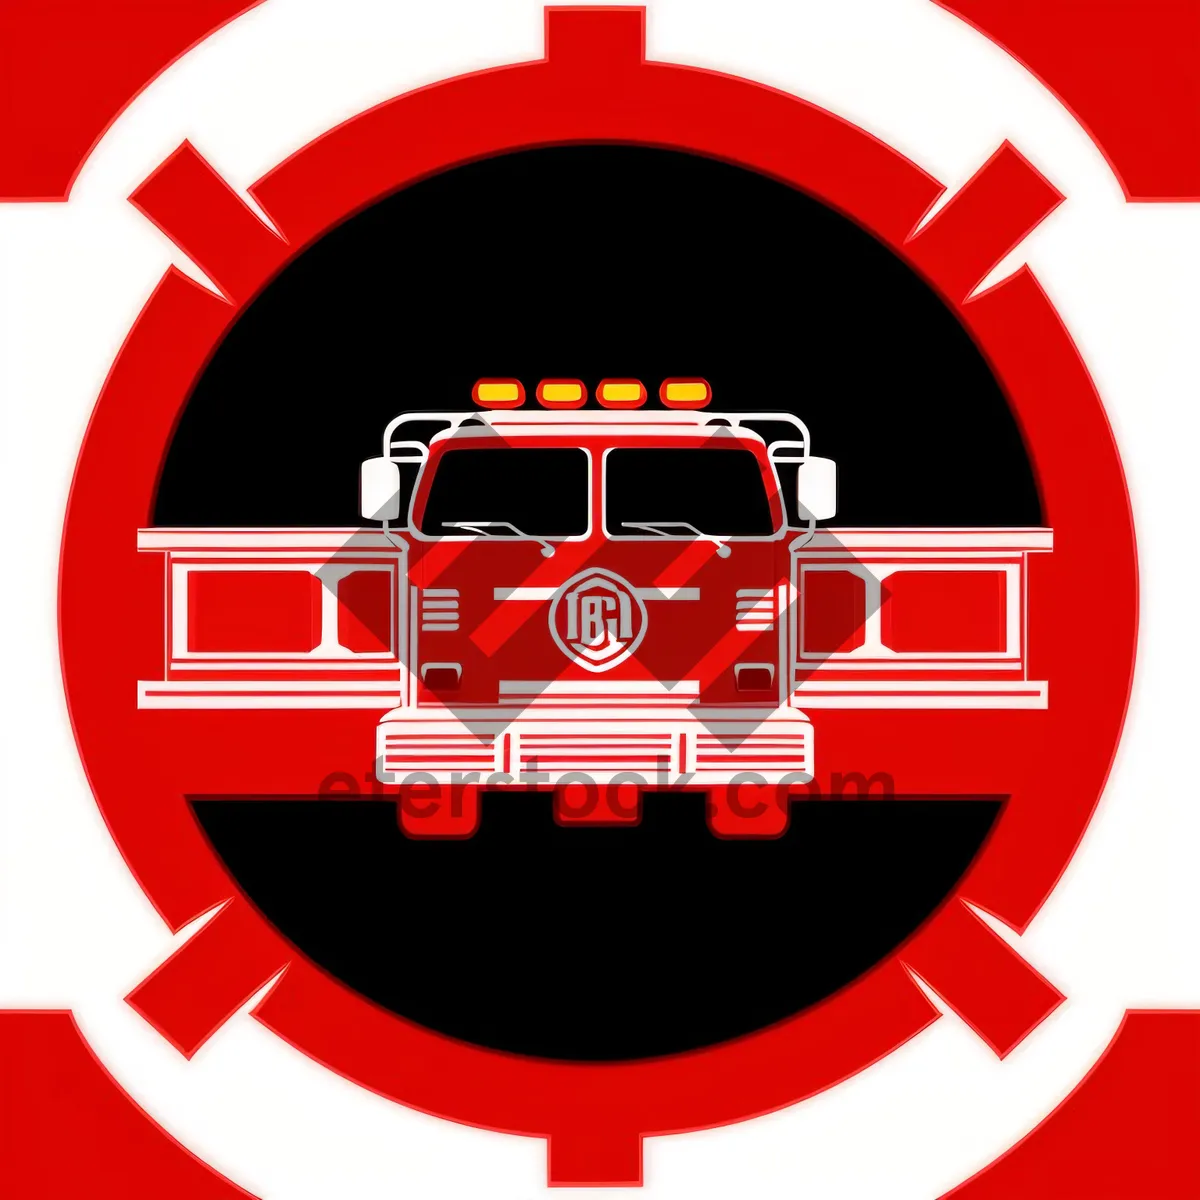 Picture of Fire Station Facility Symbol - Iconic Emblem and Flag